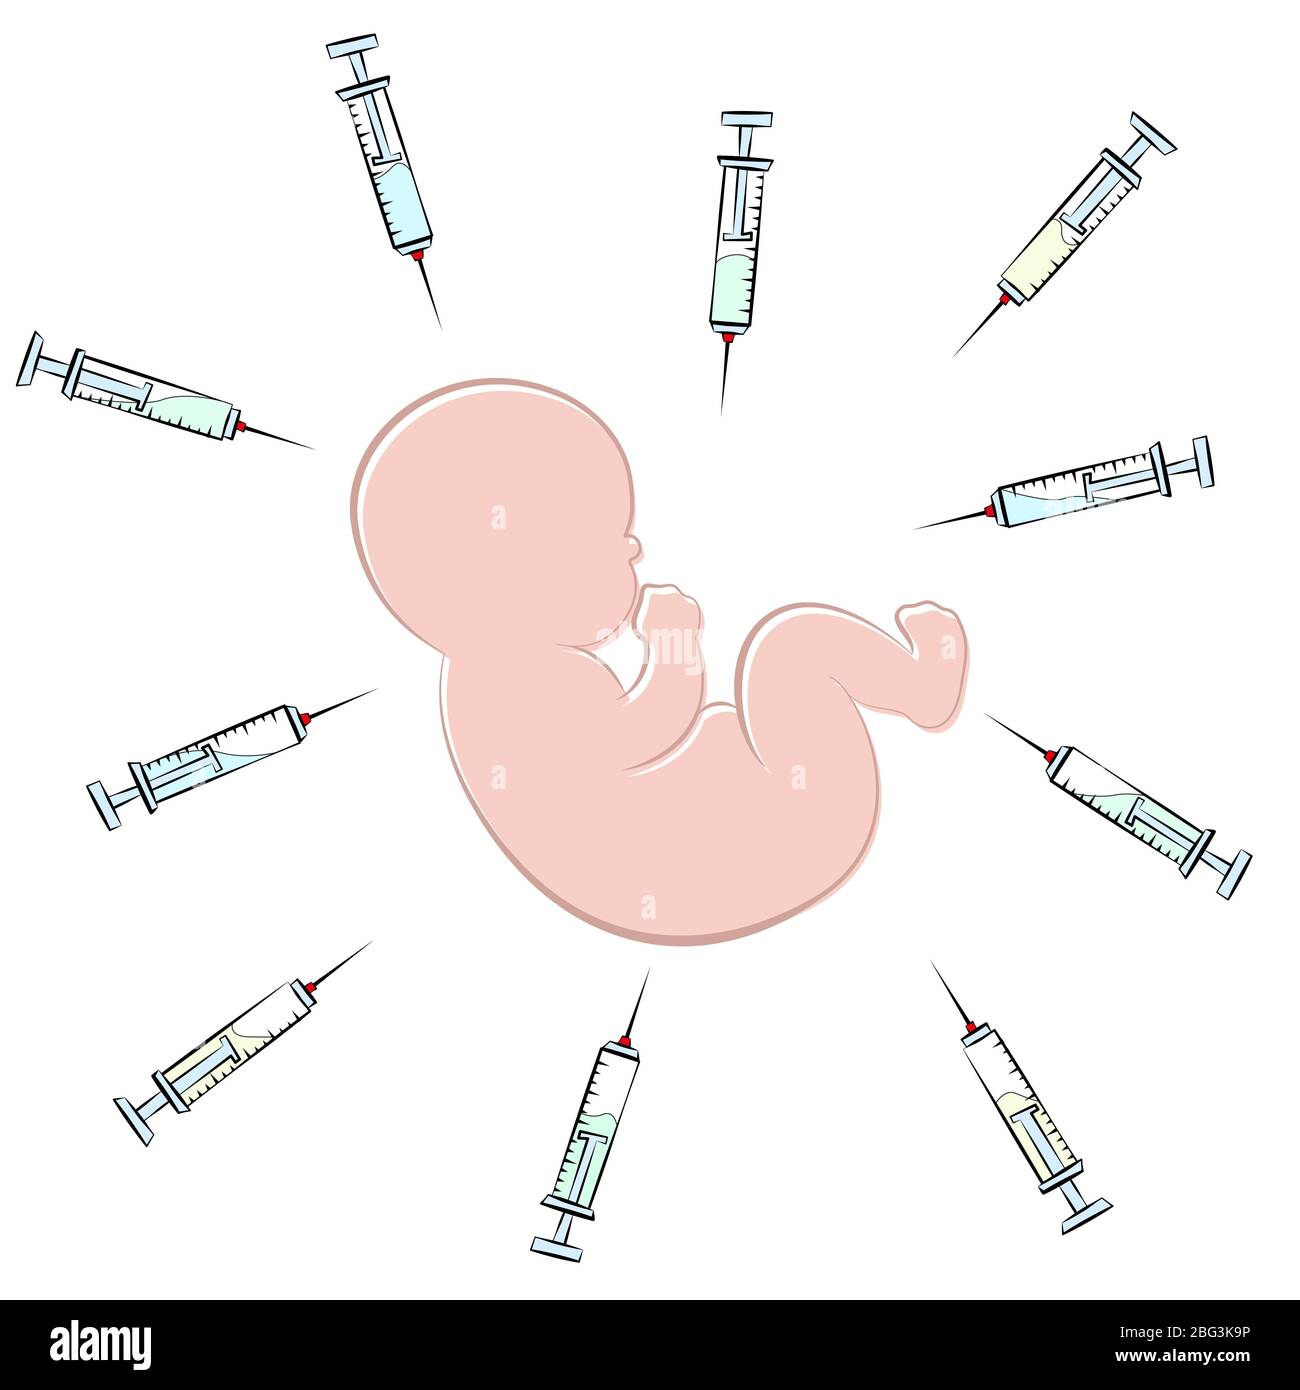 Baby surrounded by syringes, symbolic for vaccine insanity against measles, polio, smallpox, diphtheria, tetanus, chicken pox. Stock Photo